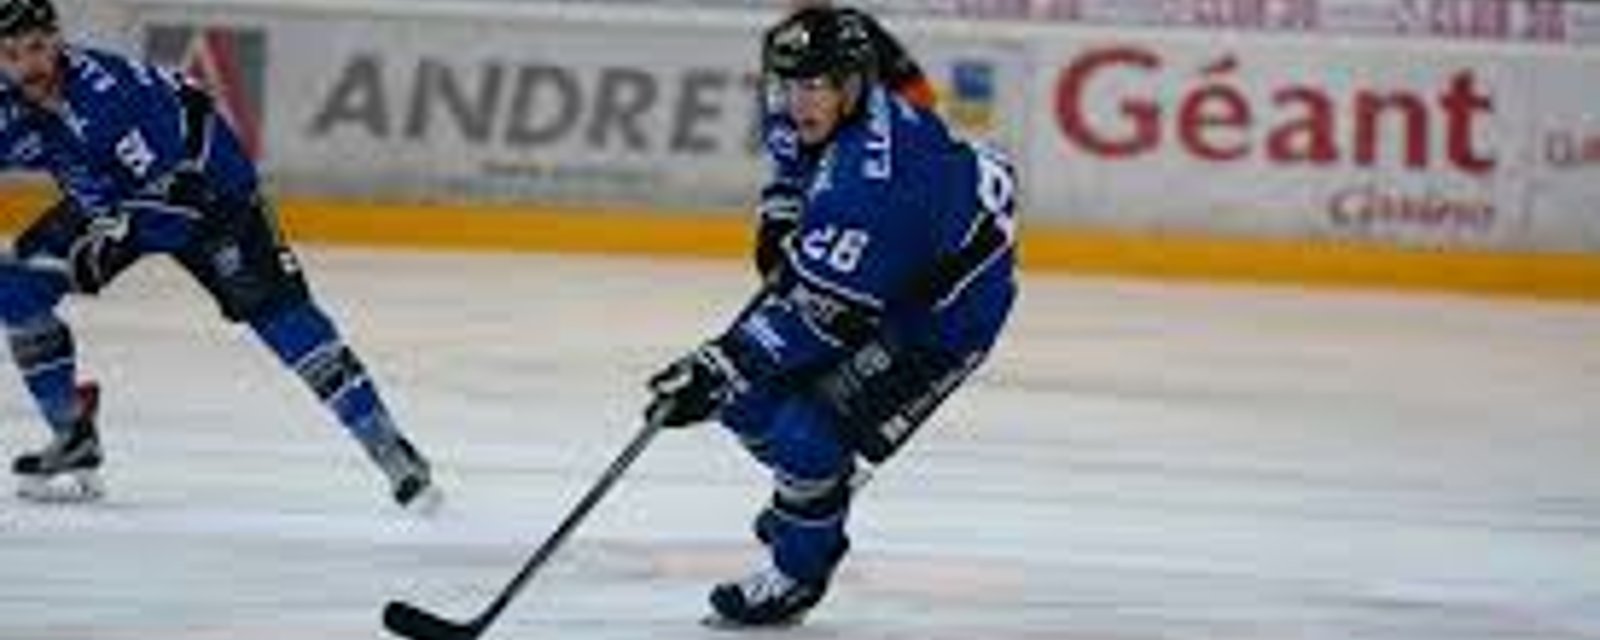 Finnish hockey star Puhakka comes out as gay and encourages NHLers to do the same 